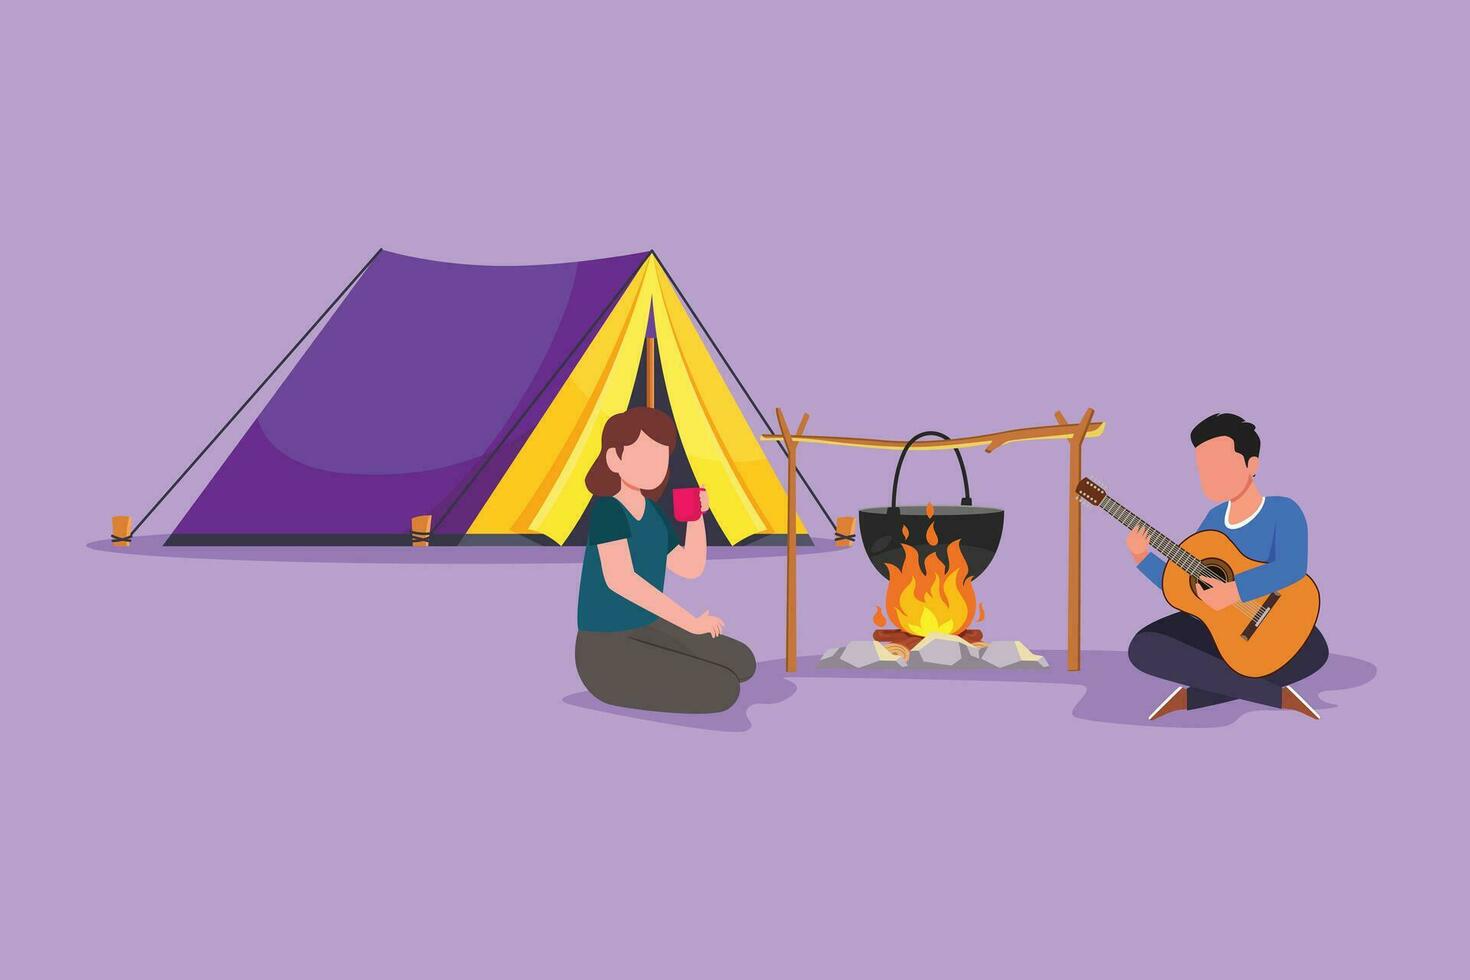 Graphic flat design drawing camping romantic couple around campfire tents. Man playing guitar and woman drinking hot tea getting warm near bonfire sitting on ground. Cartoon style vector illustration